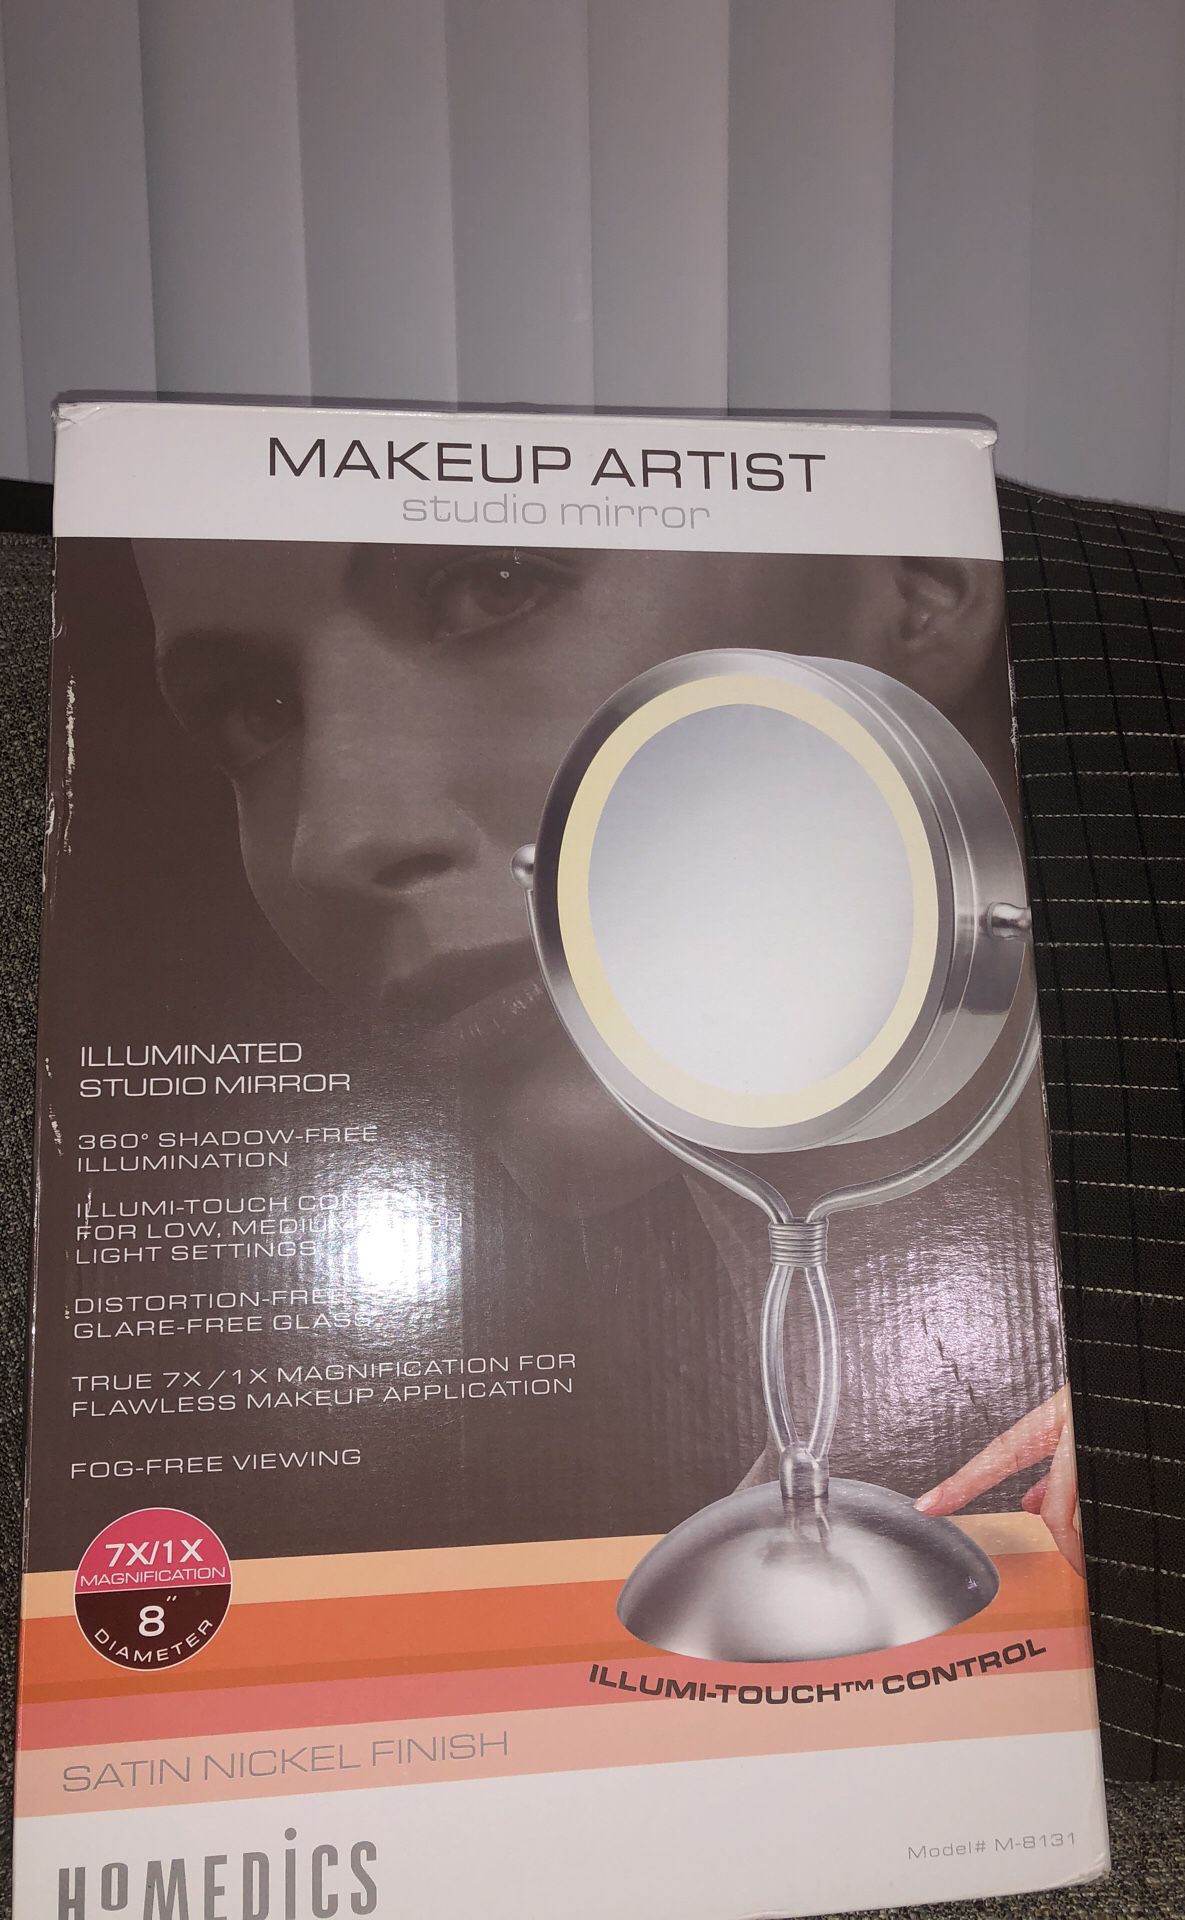 Makeup Artist Studio Mirror. Please see all the pictures and read the description